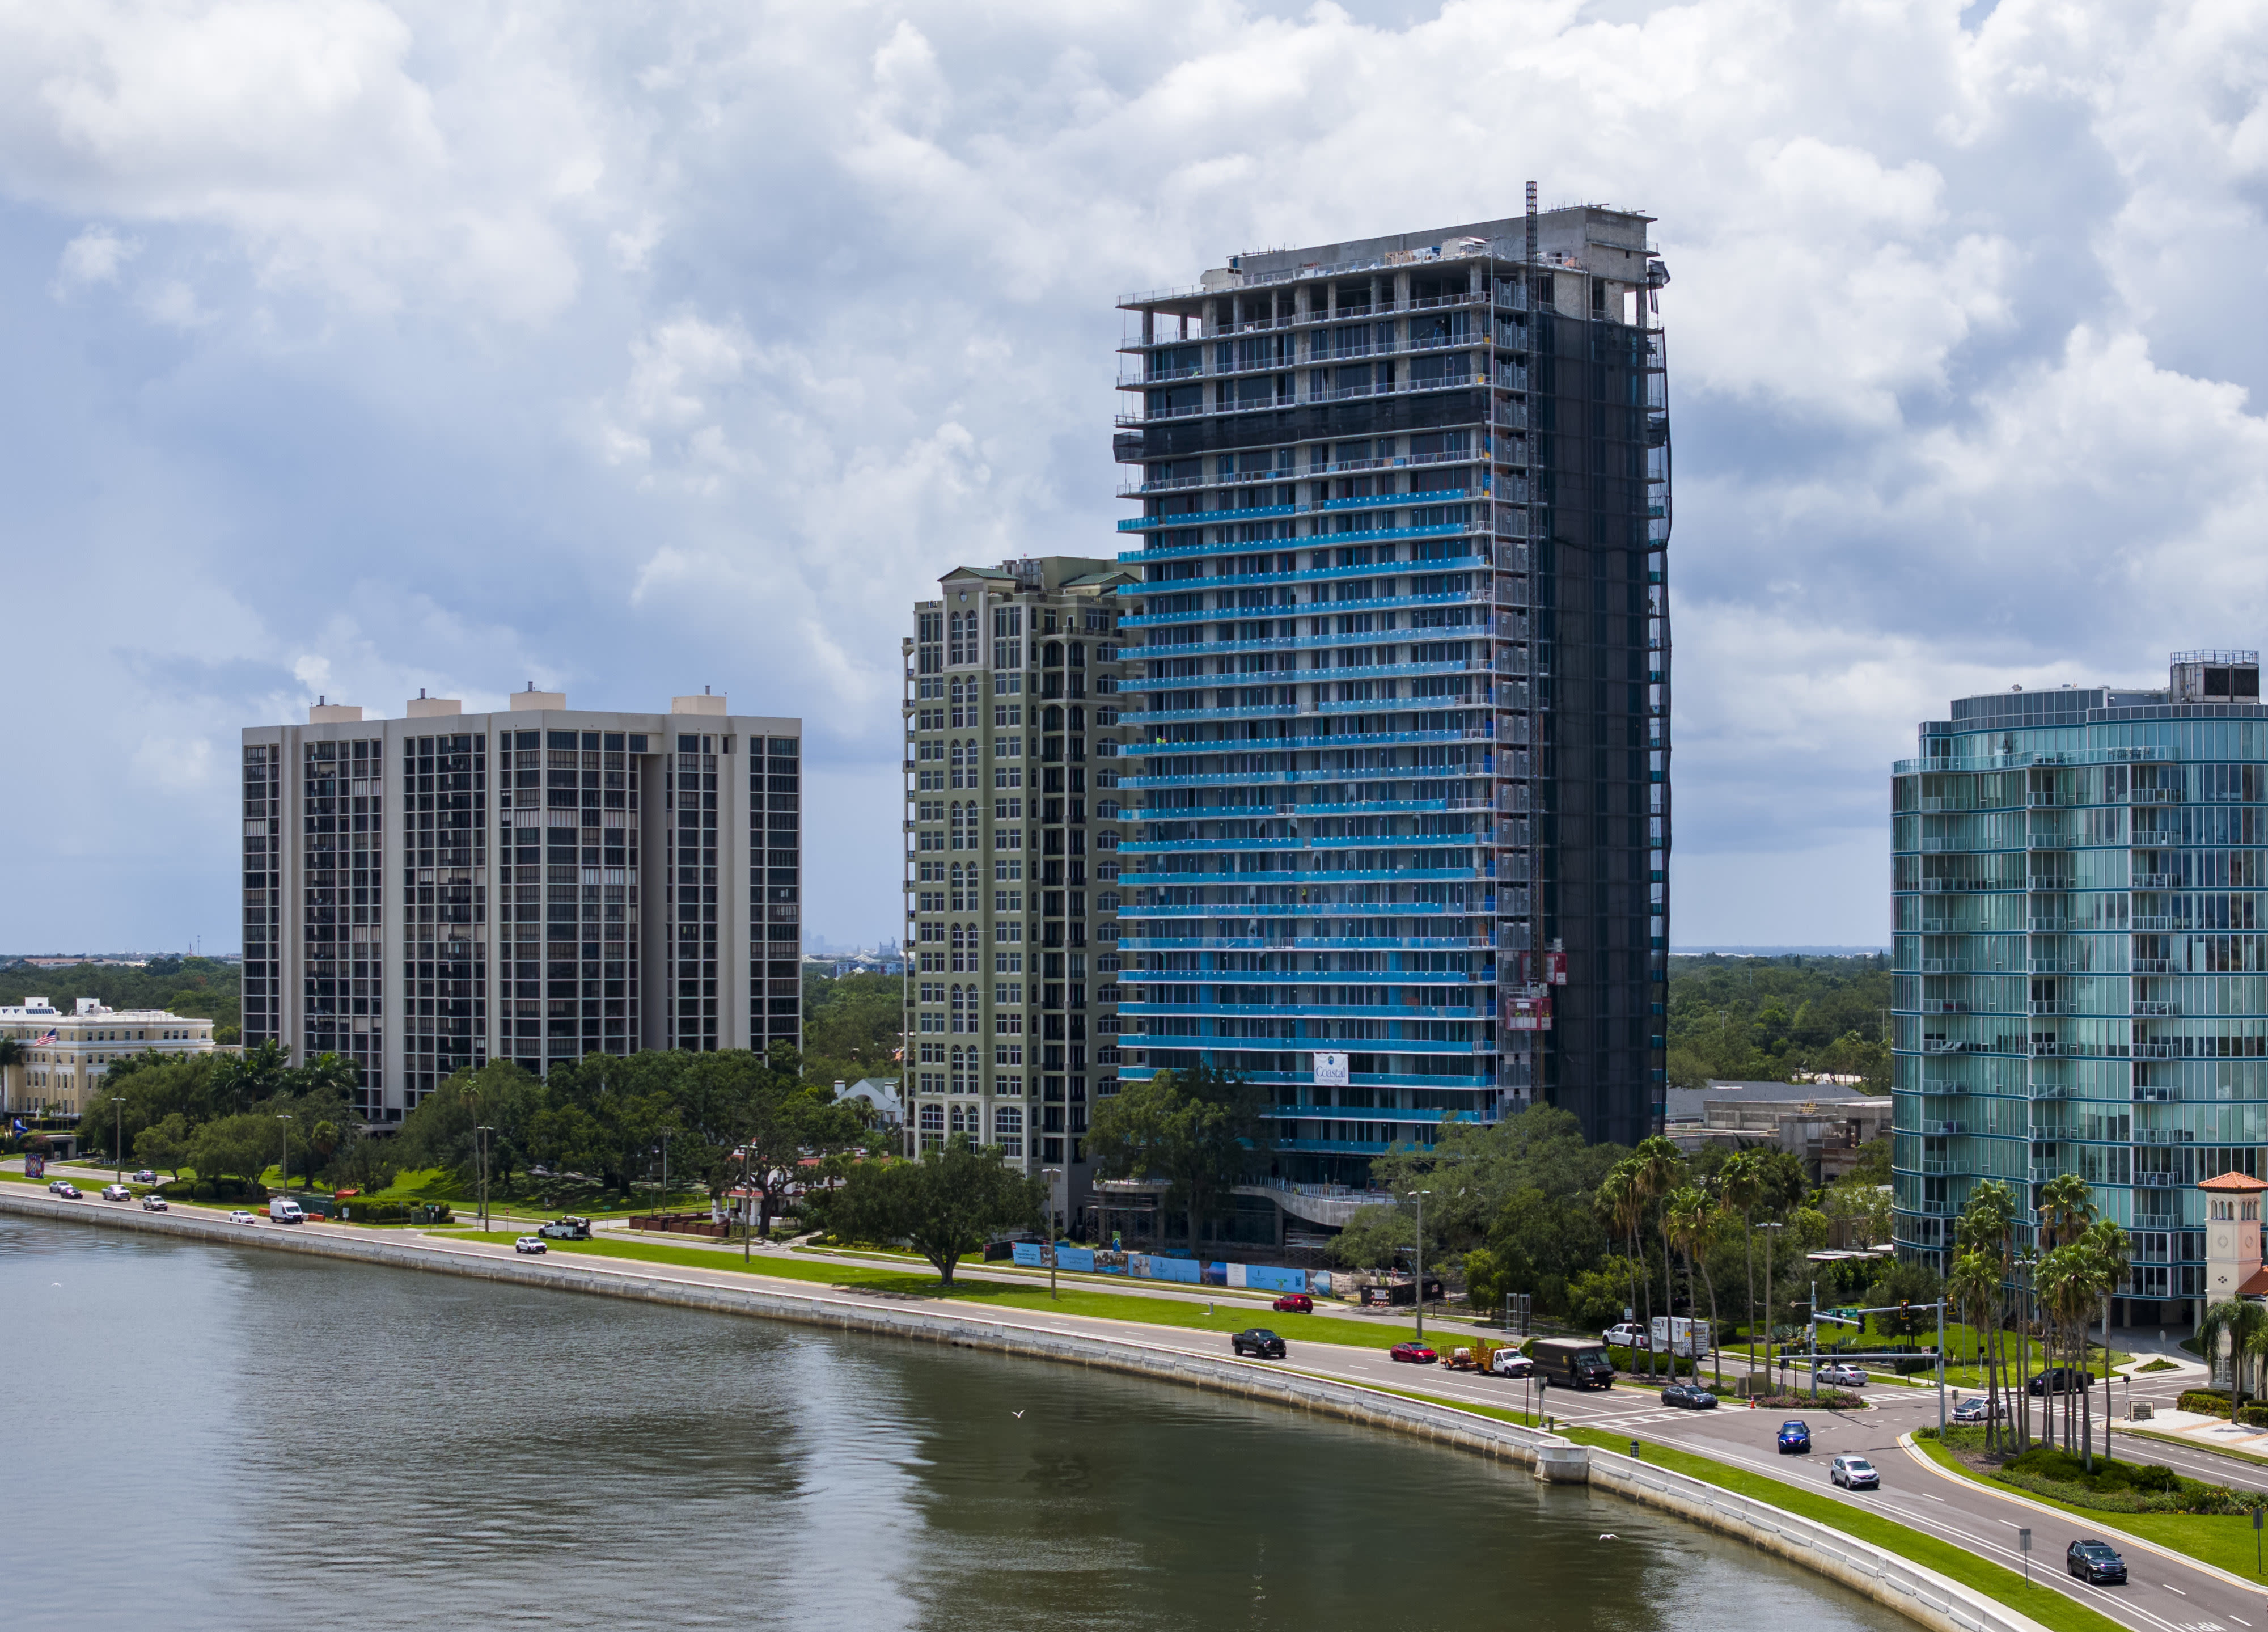 Is Tampa the next Miami? Related Group CEO Jorge Pérez weighs in